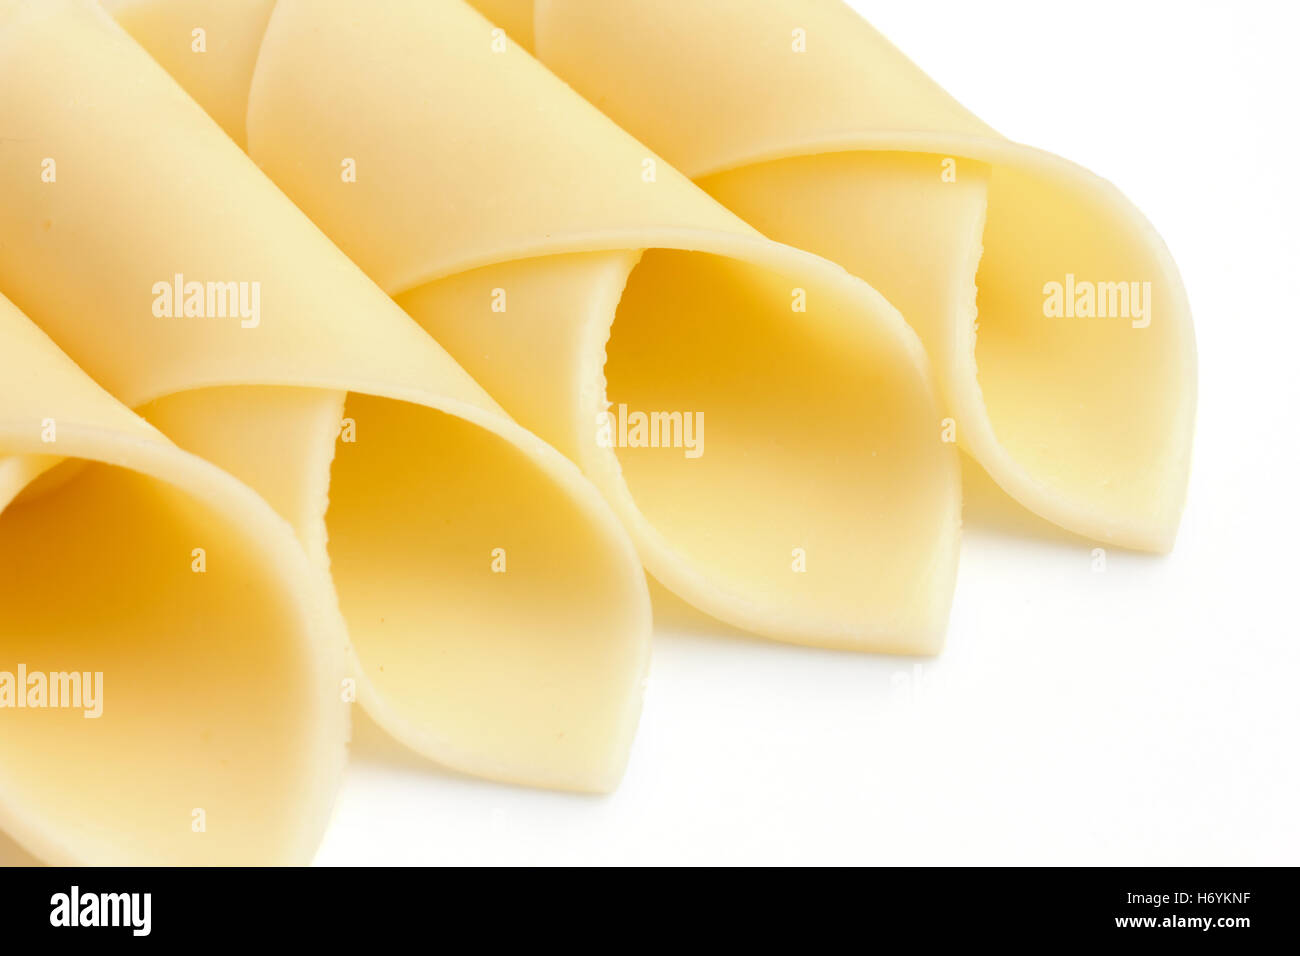 Wrapped yellow cheese slices arranged on a white surface. Stock Photo